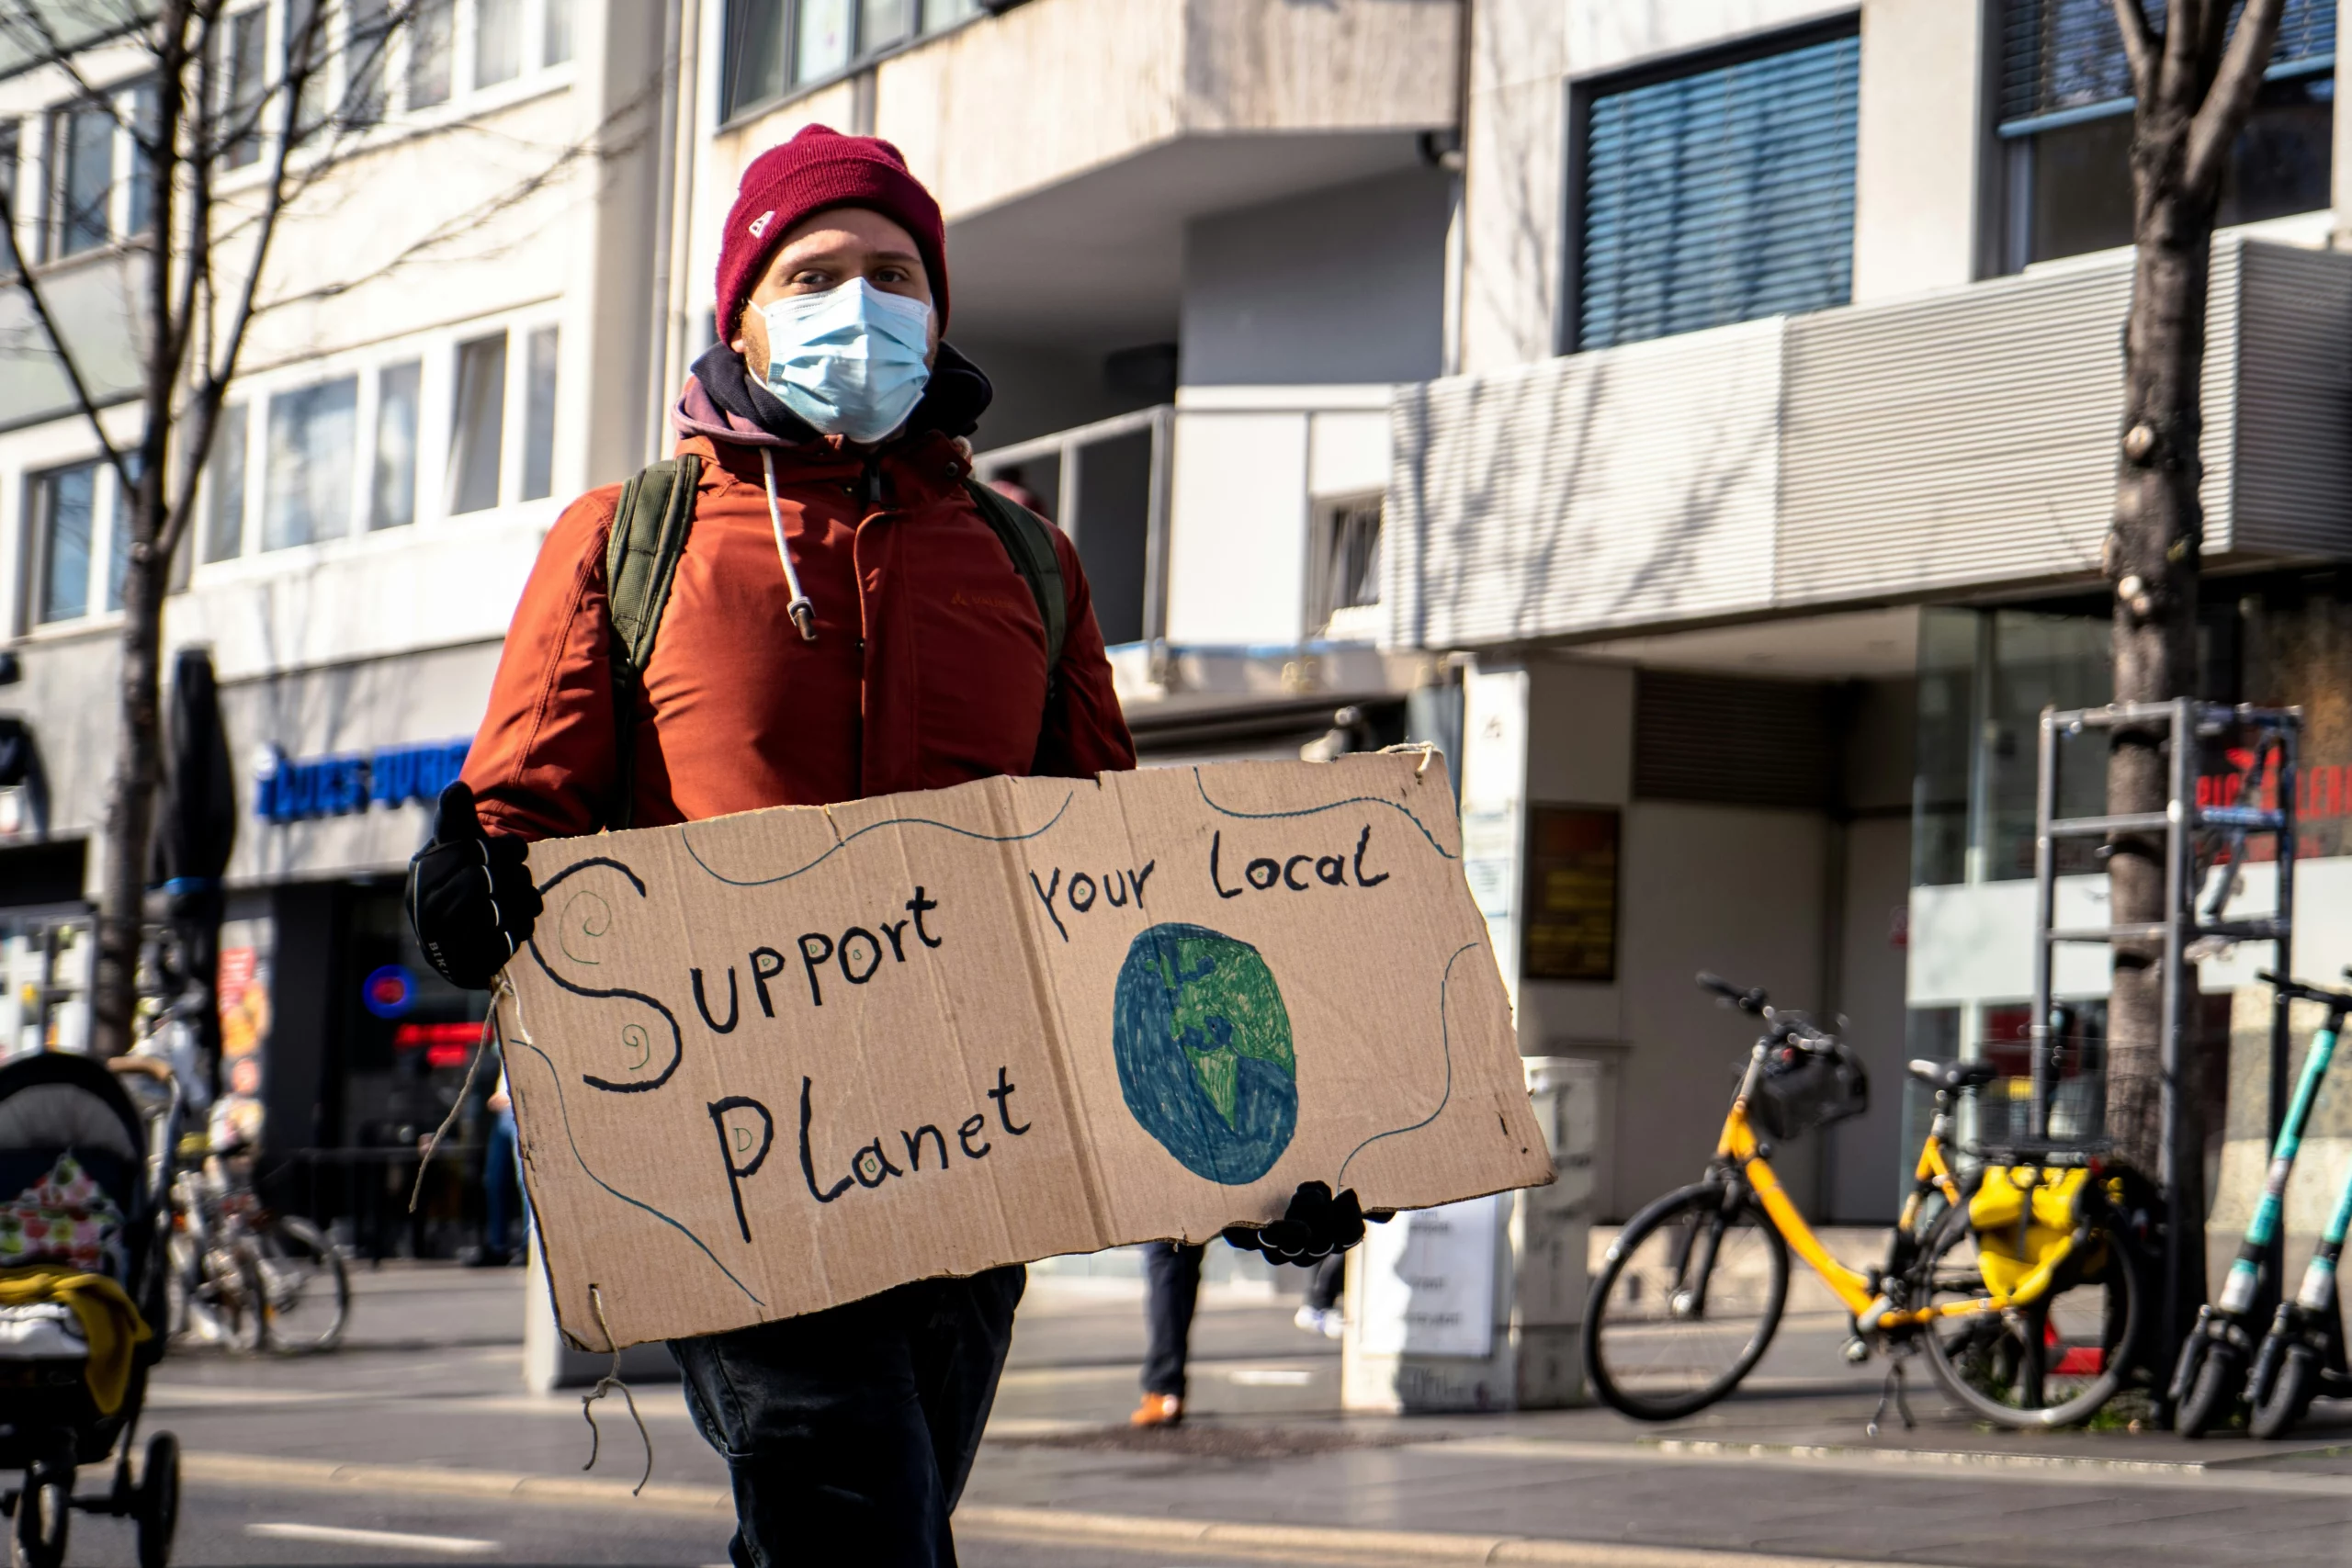 A man is holding a sign that says 'support your local planet'. He wants more people to use green cleaners and go green with eco friendly cleaning solutions.